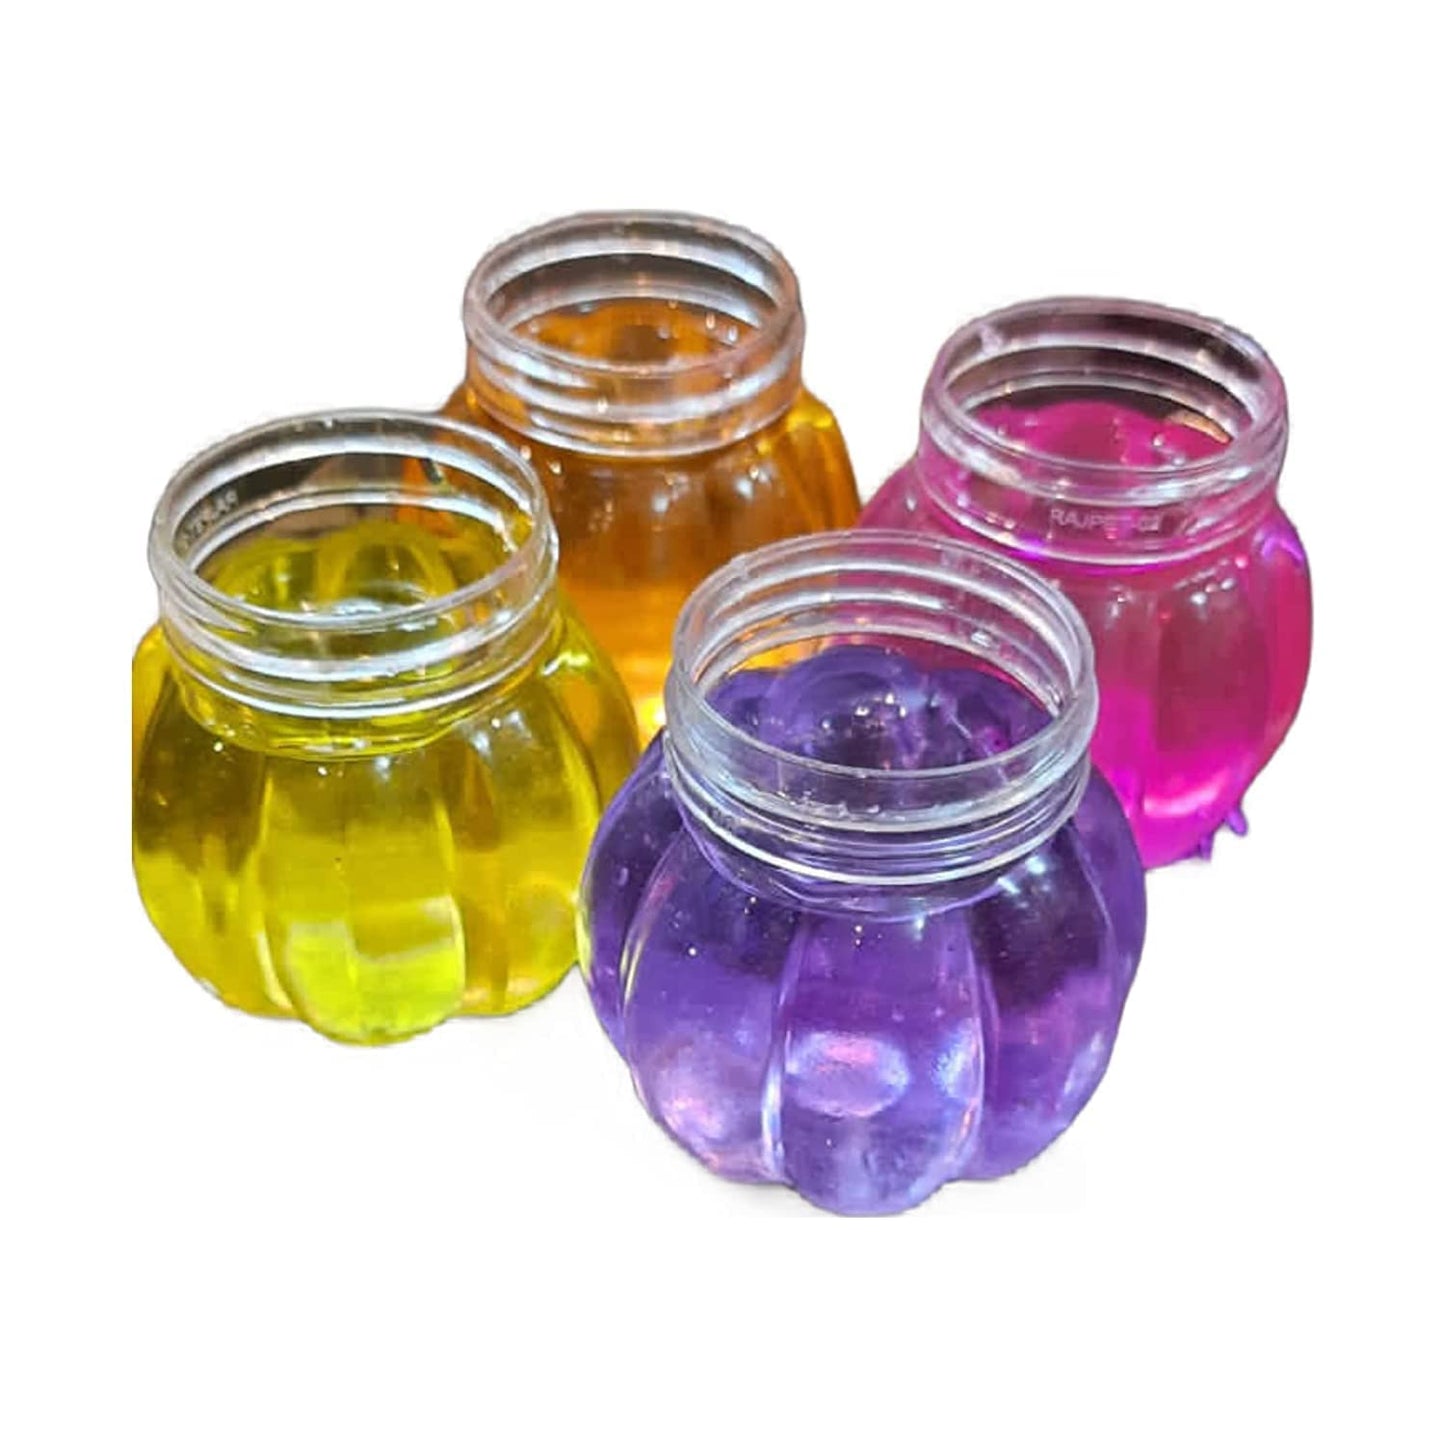 Plus Shine Non-Toxic Clear Crystal Slime Soft Jelly Clay Putty mud